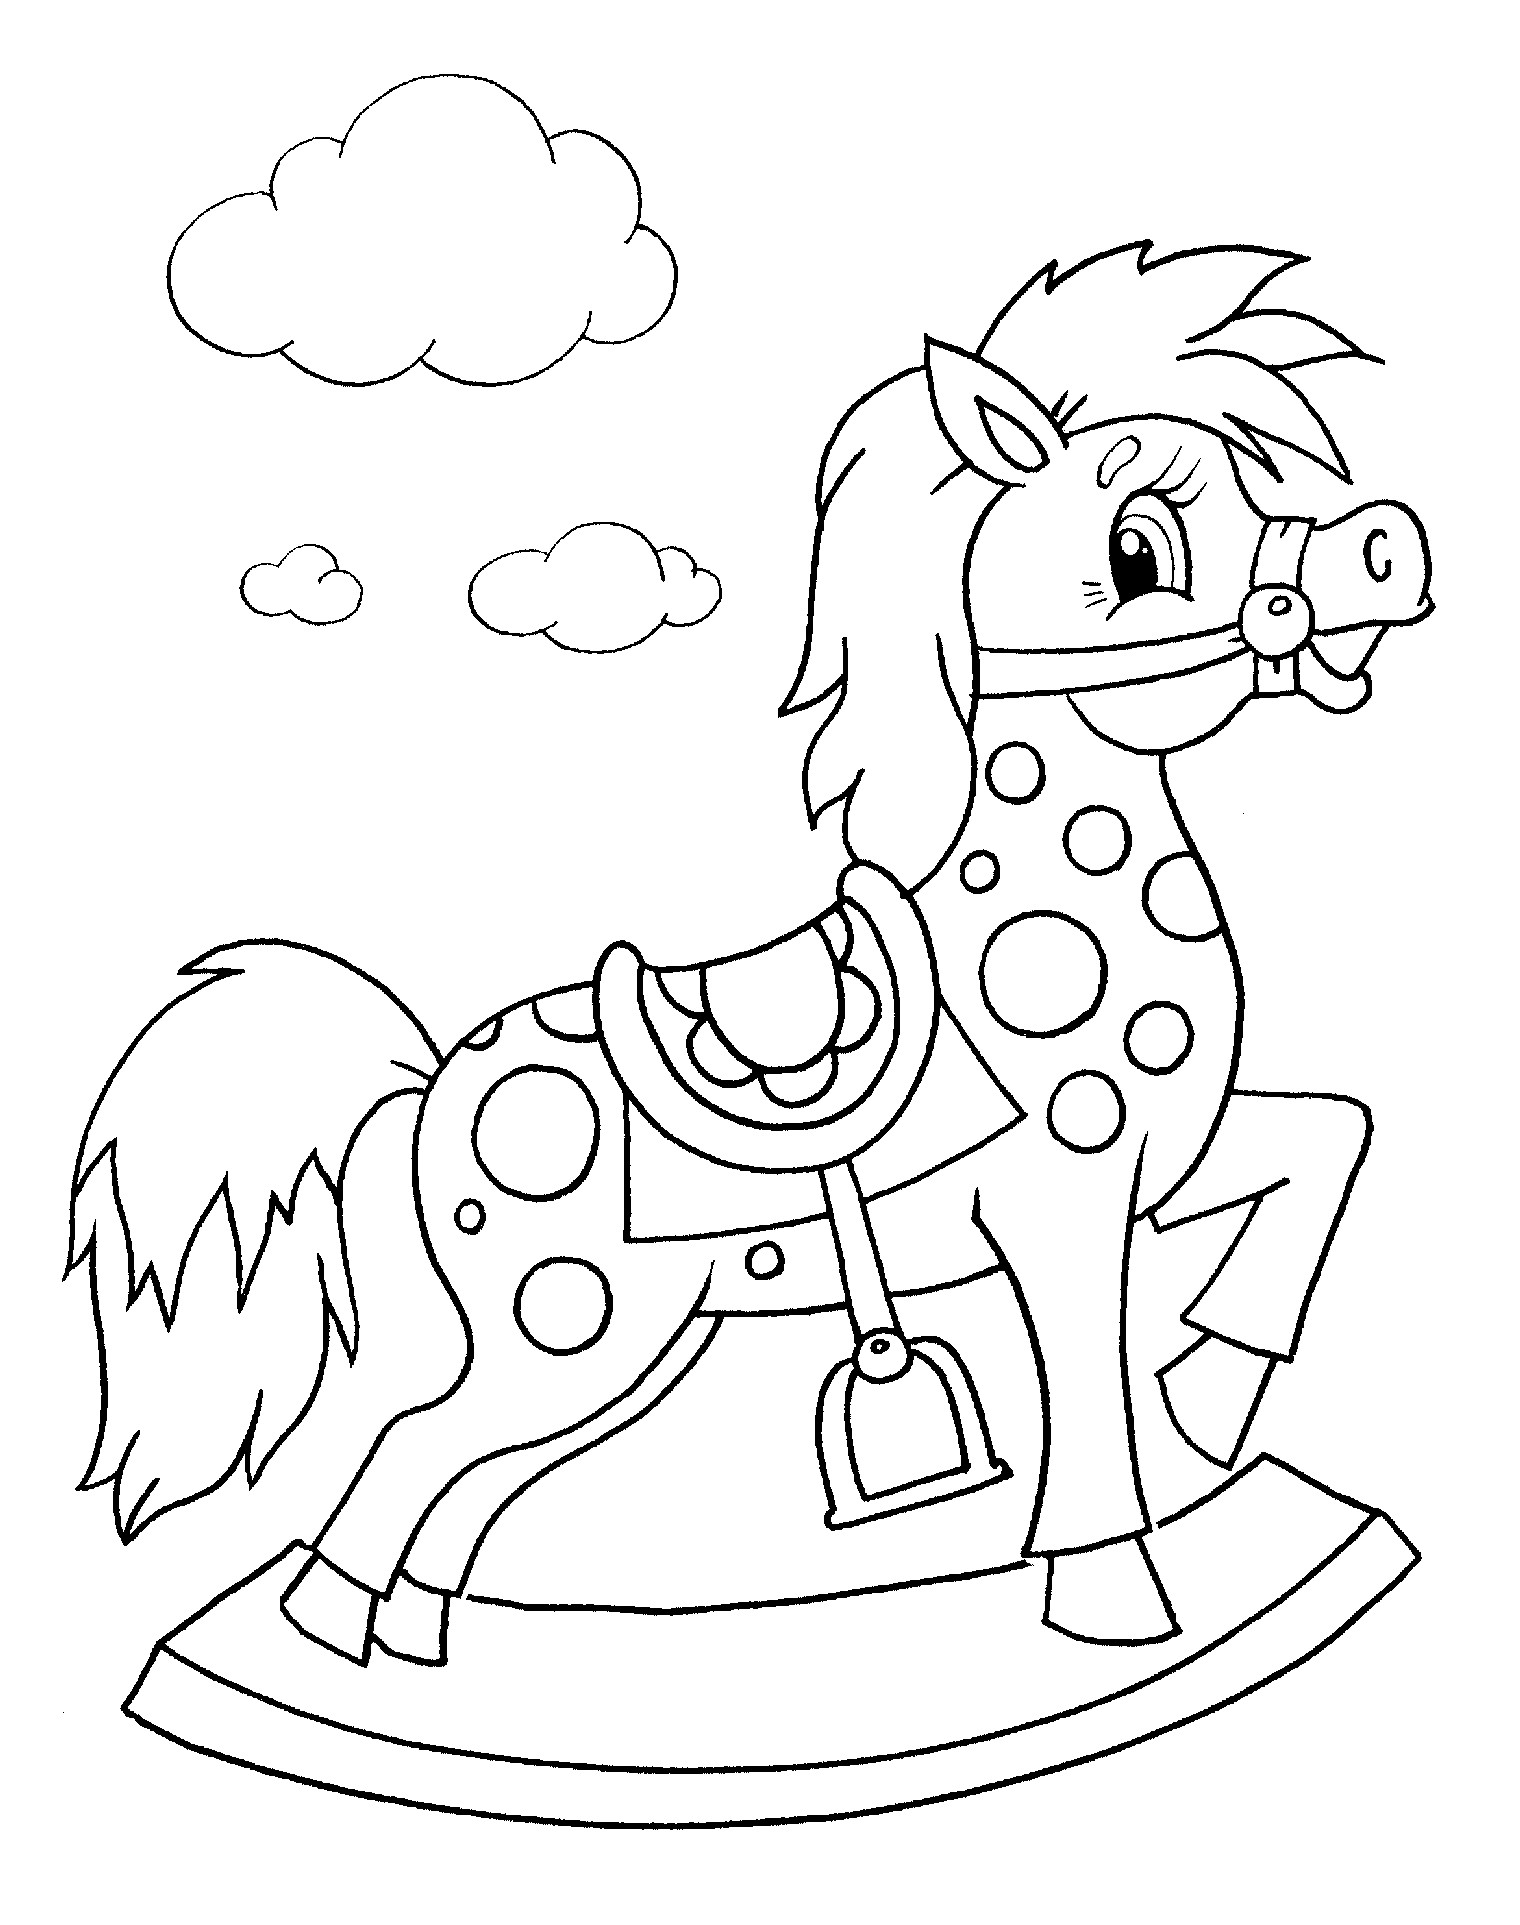 Coloring Sheets For Children
 Coloring pages for children of 4 5 years to and